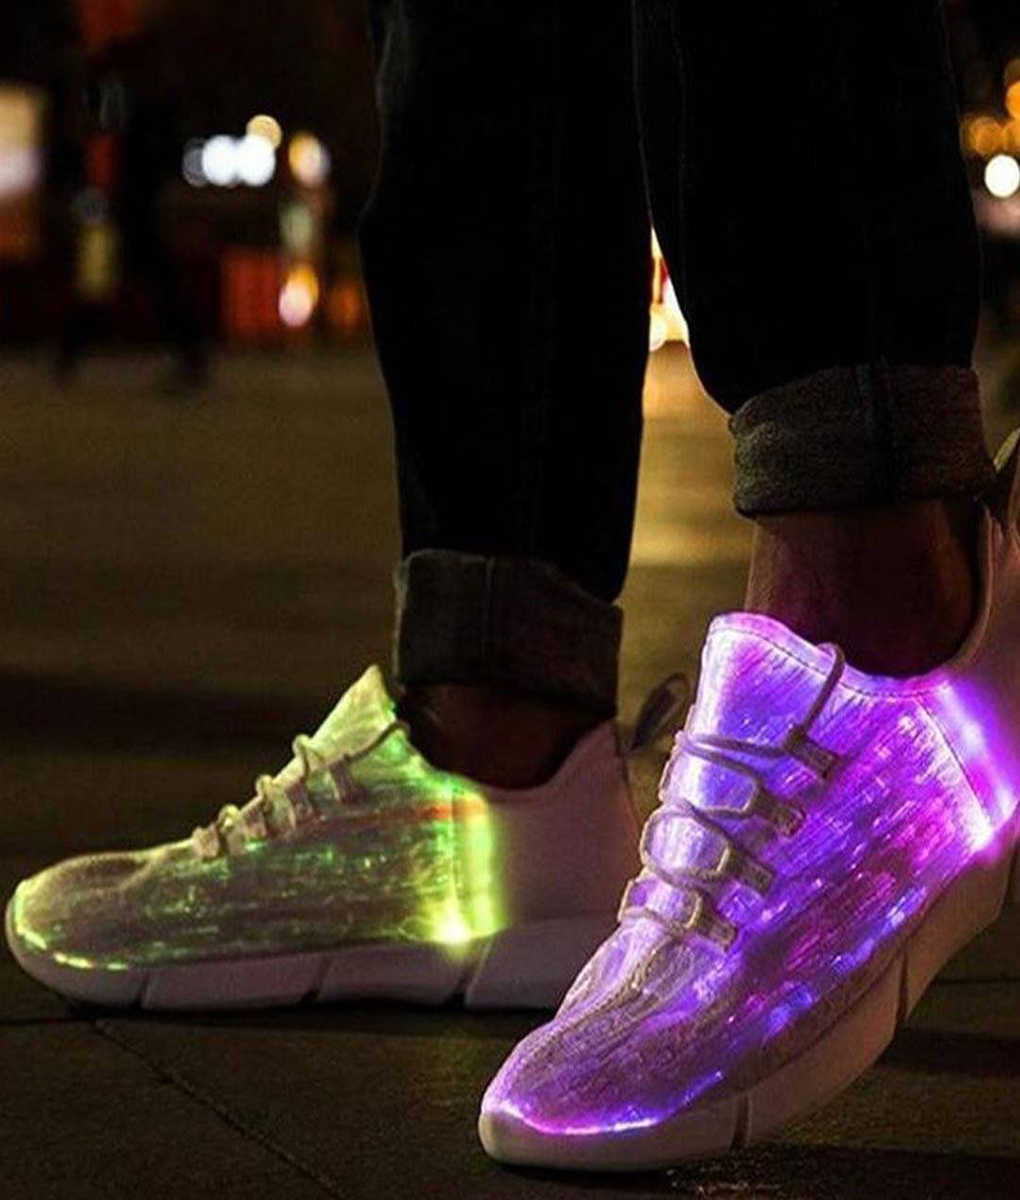 Girl Kid Boys Fiber Optic Led Shoes Usb Recharge Glowing Sneakers Light Up  Shoes